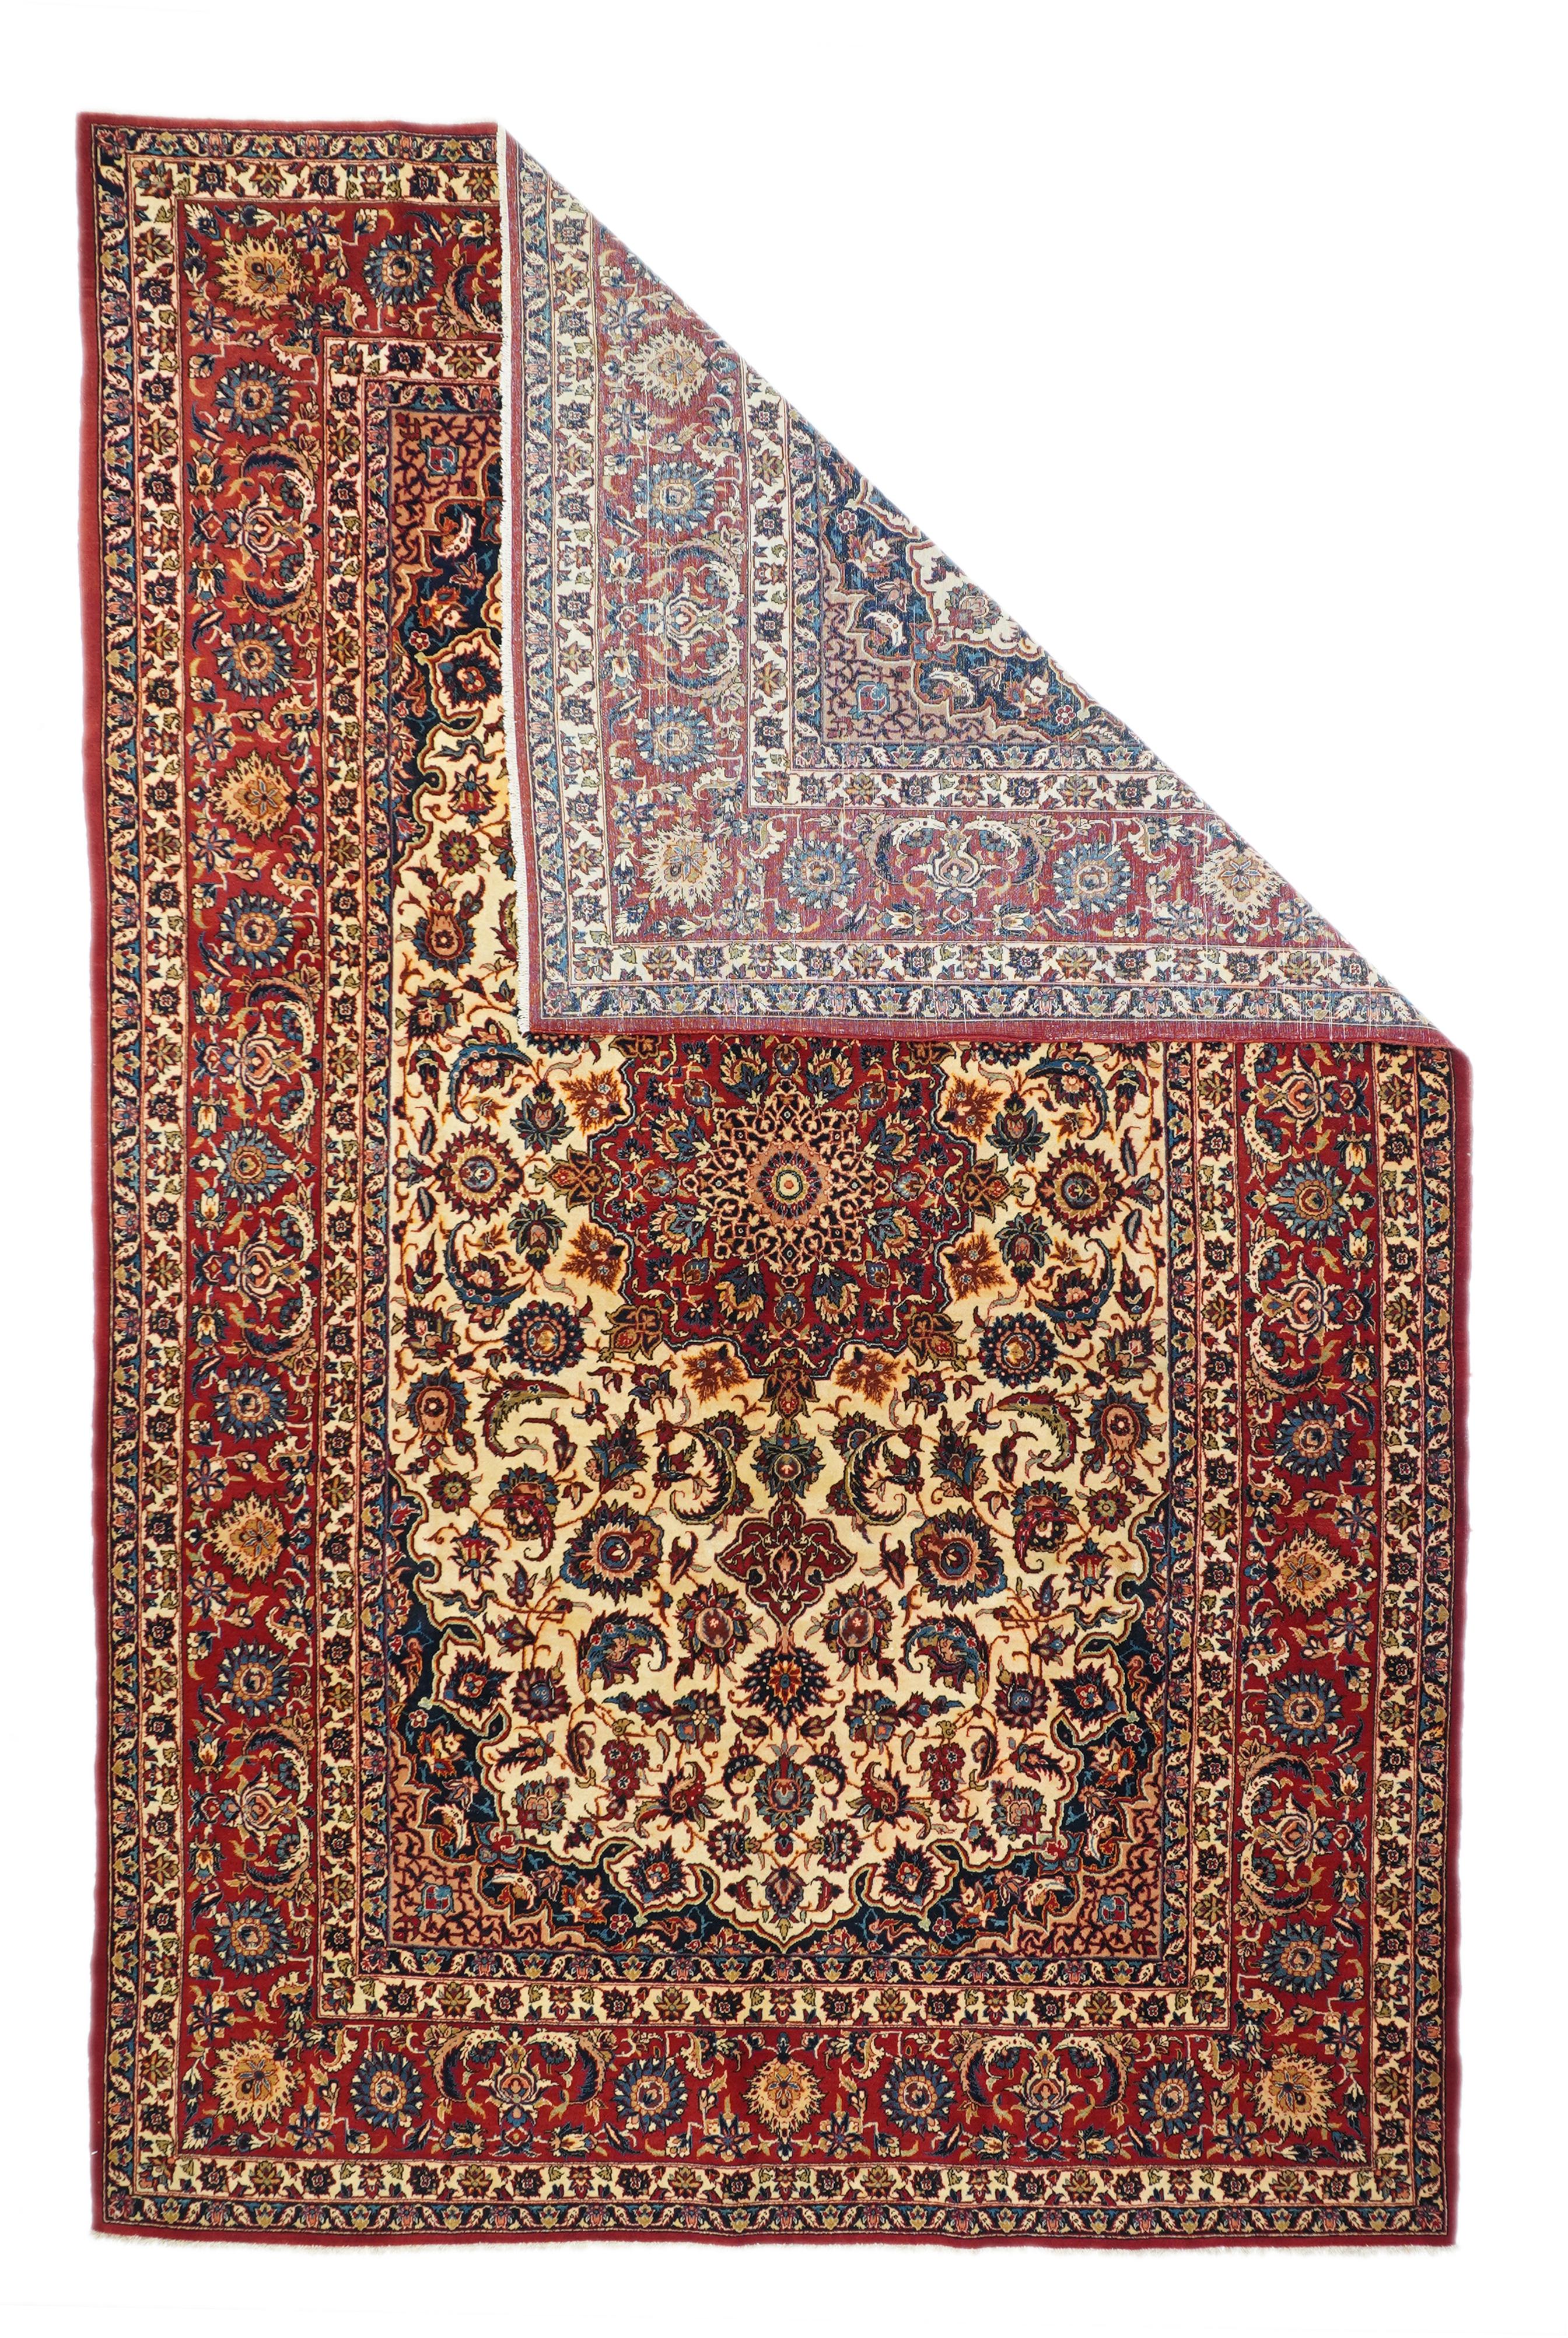 Classically Isfahan revival with an elliptical cream field centered by a red 8-point star medallion, closely supported by vinery and palmettes that shrink towards the field ends. Navy extended corners. red border with paired sickle leaves, oval